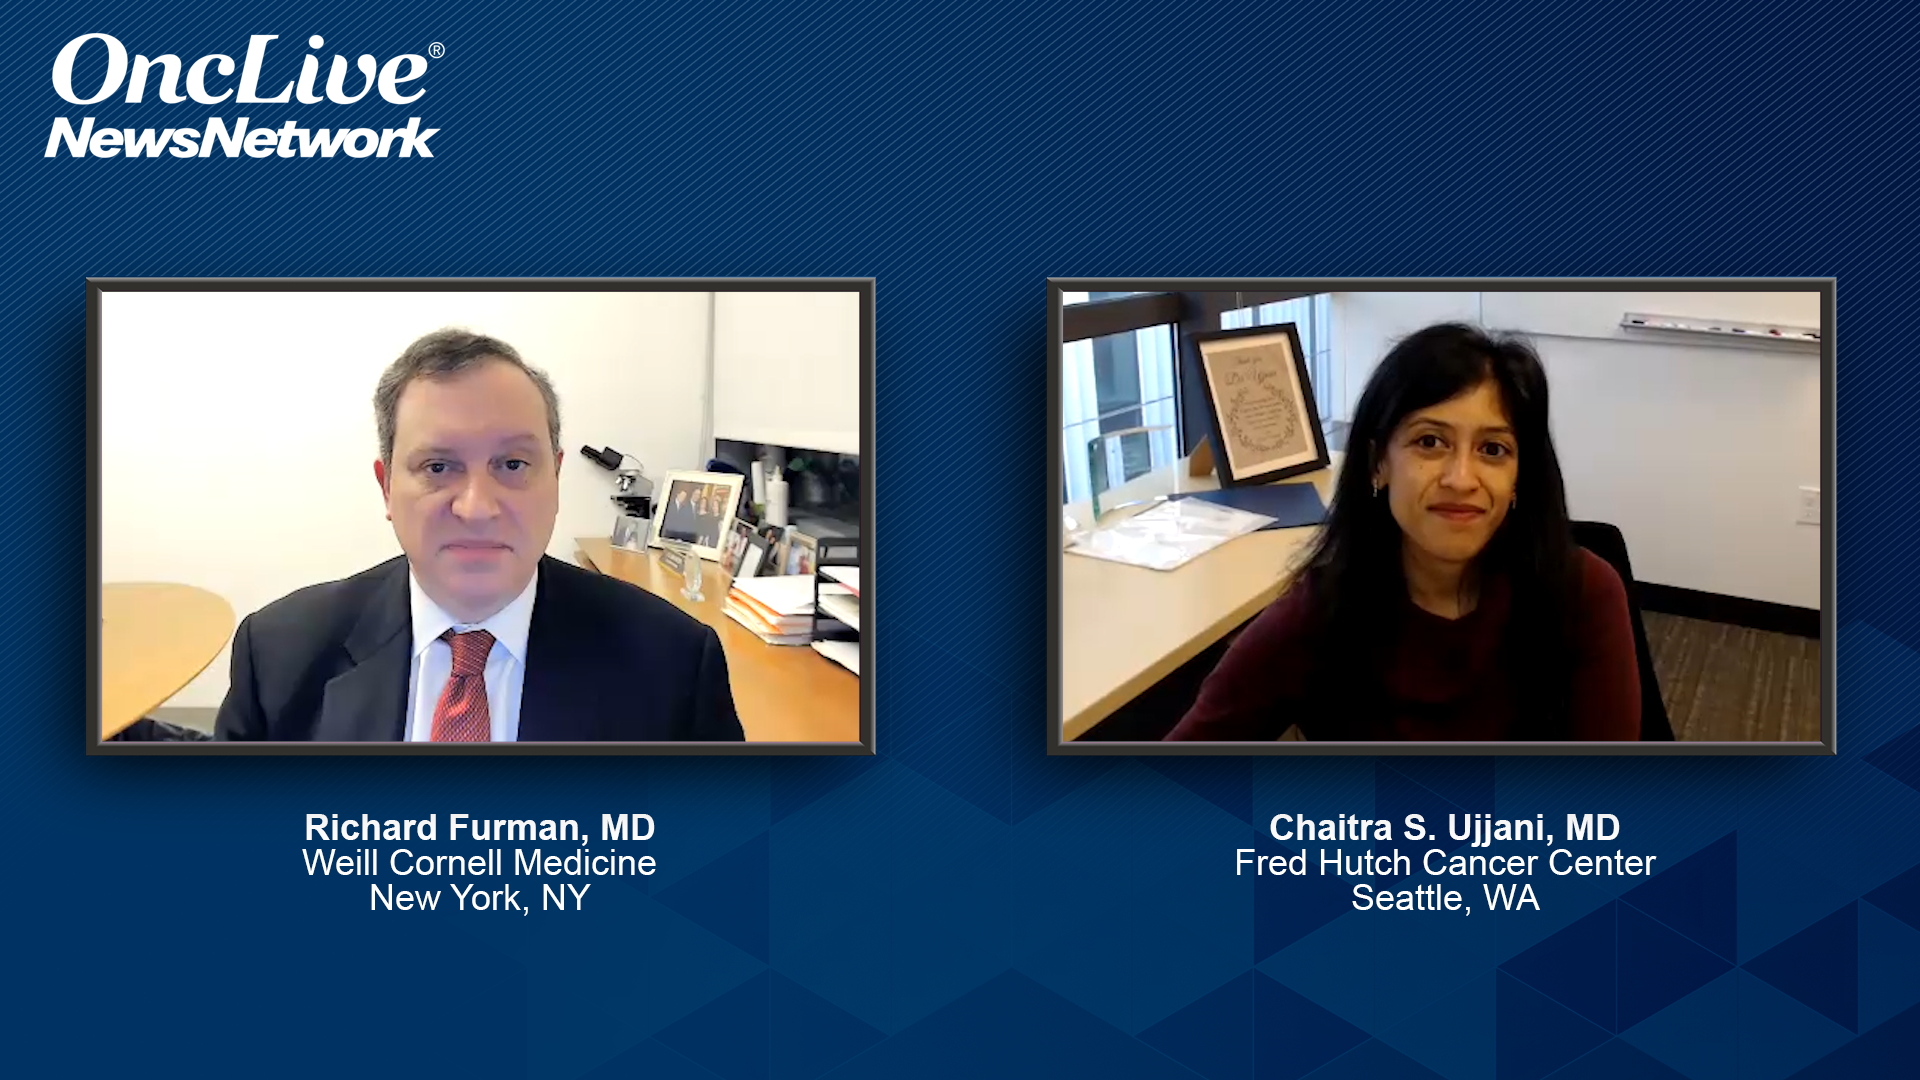 Richard Furman, MD, and Chaitra S. Ujjani, MD, experts on CLL